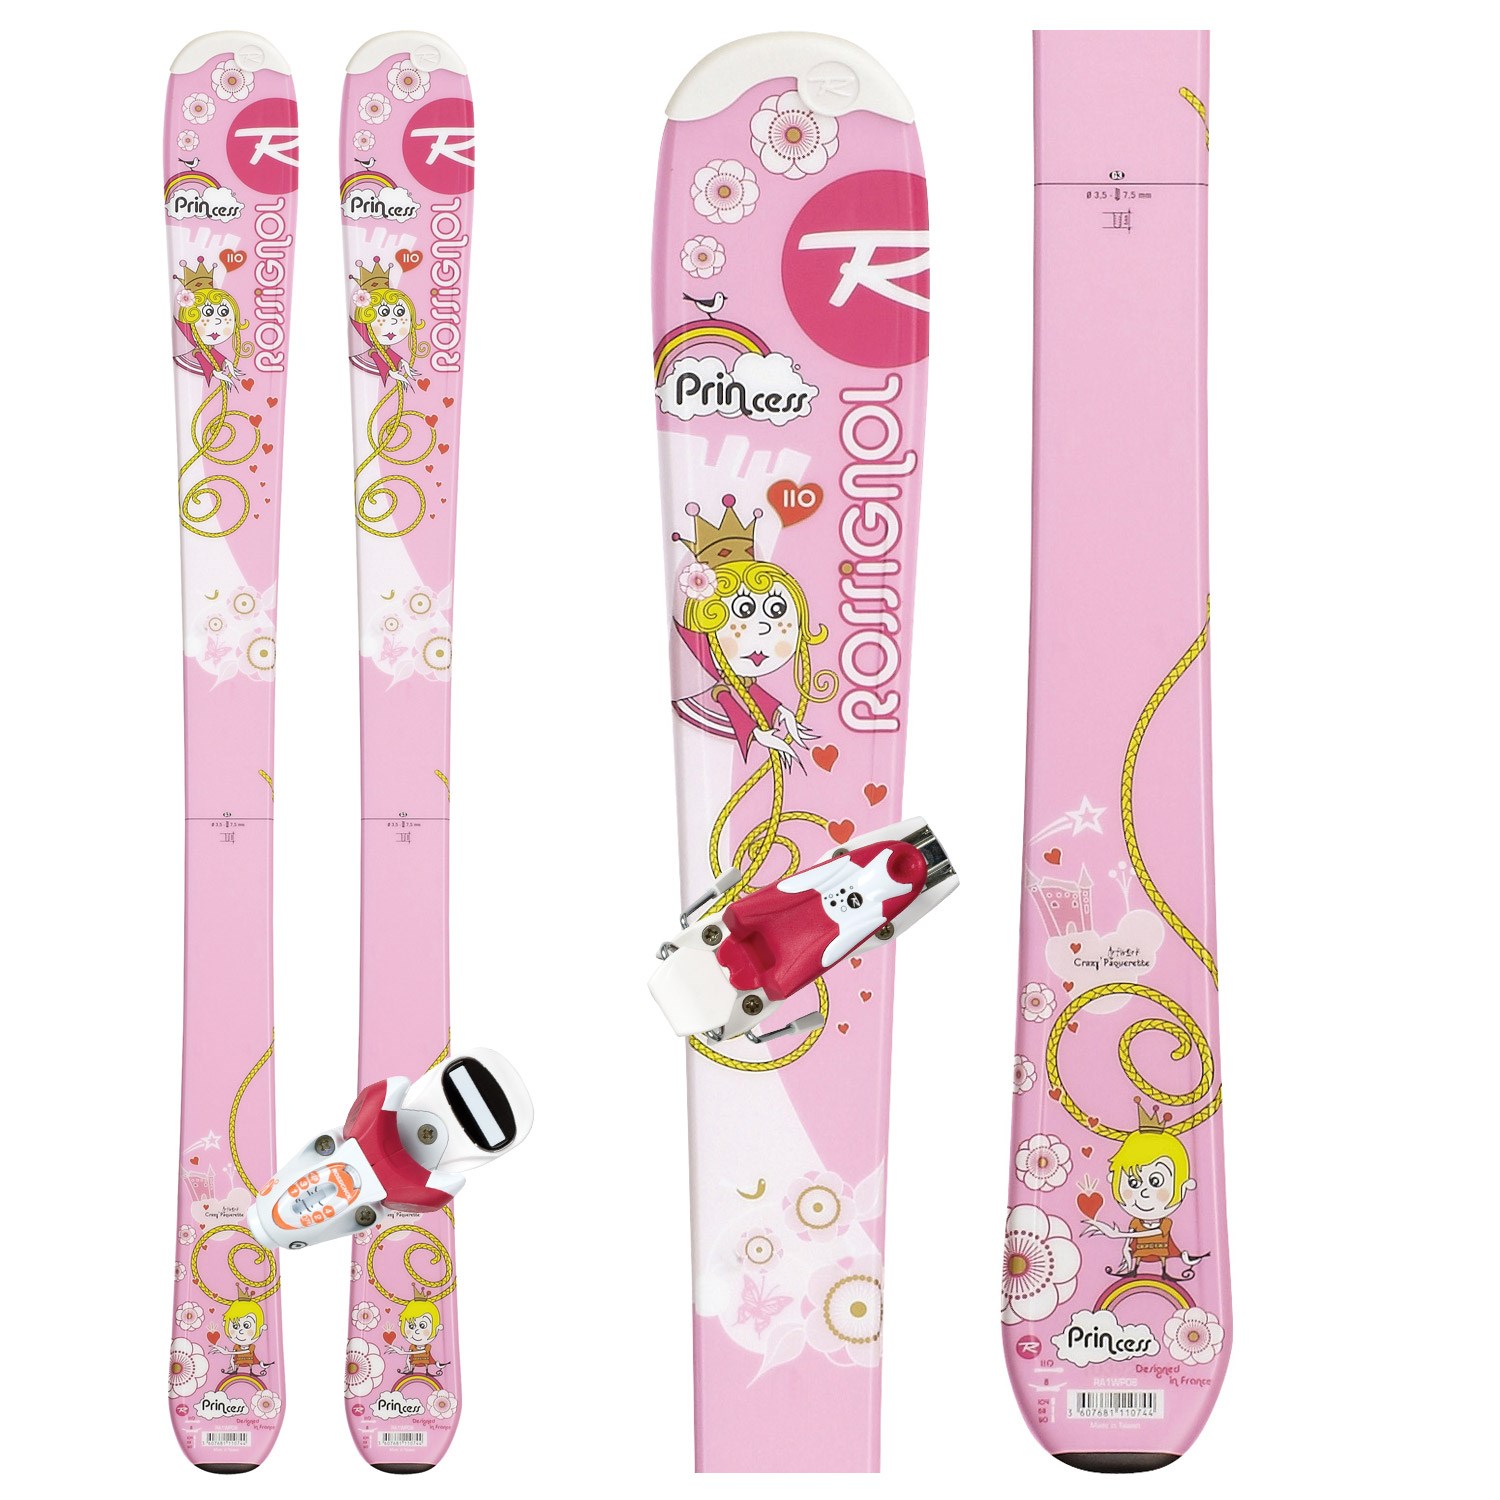 rossignol youth skis